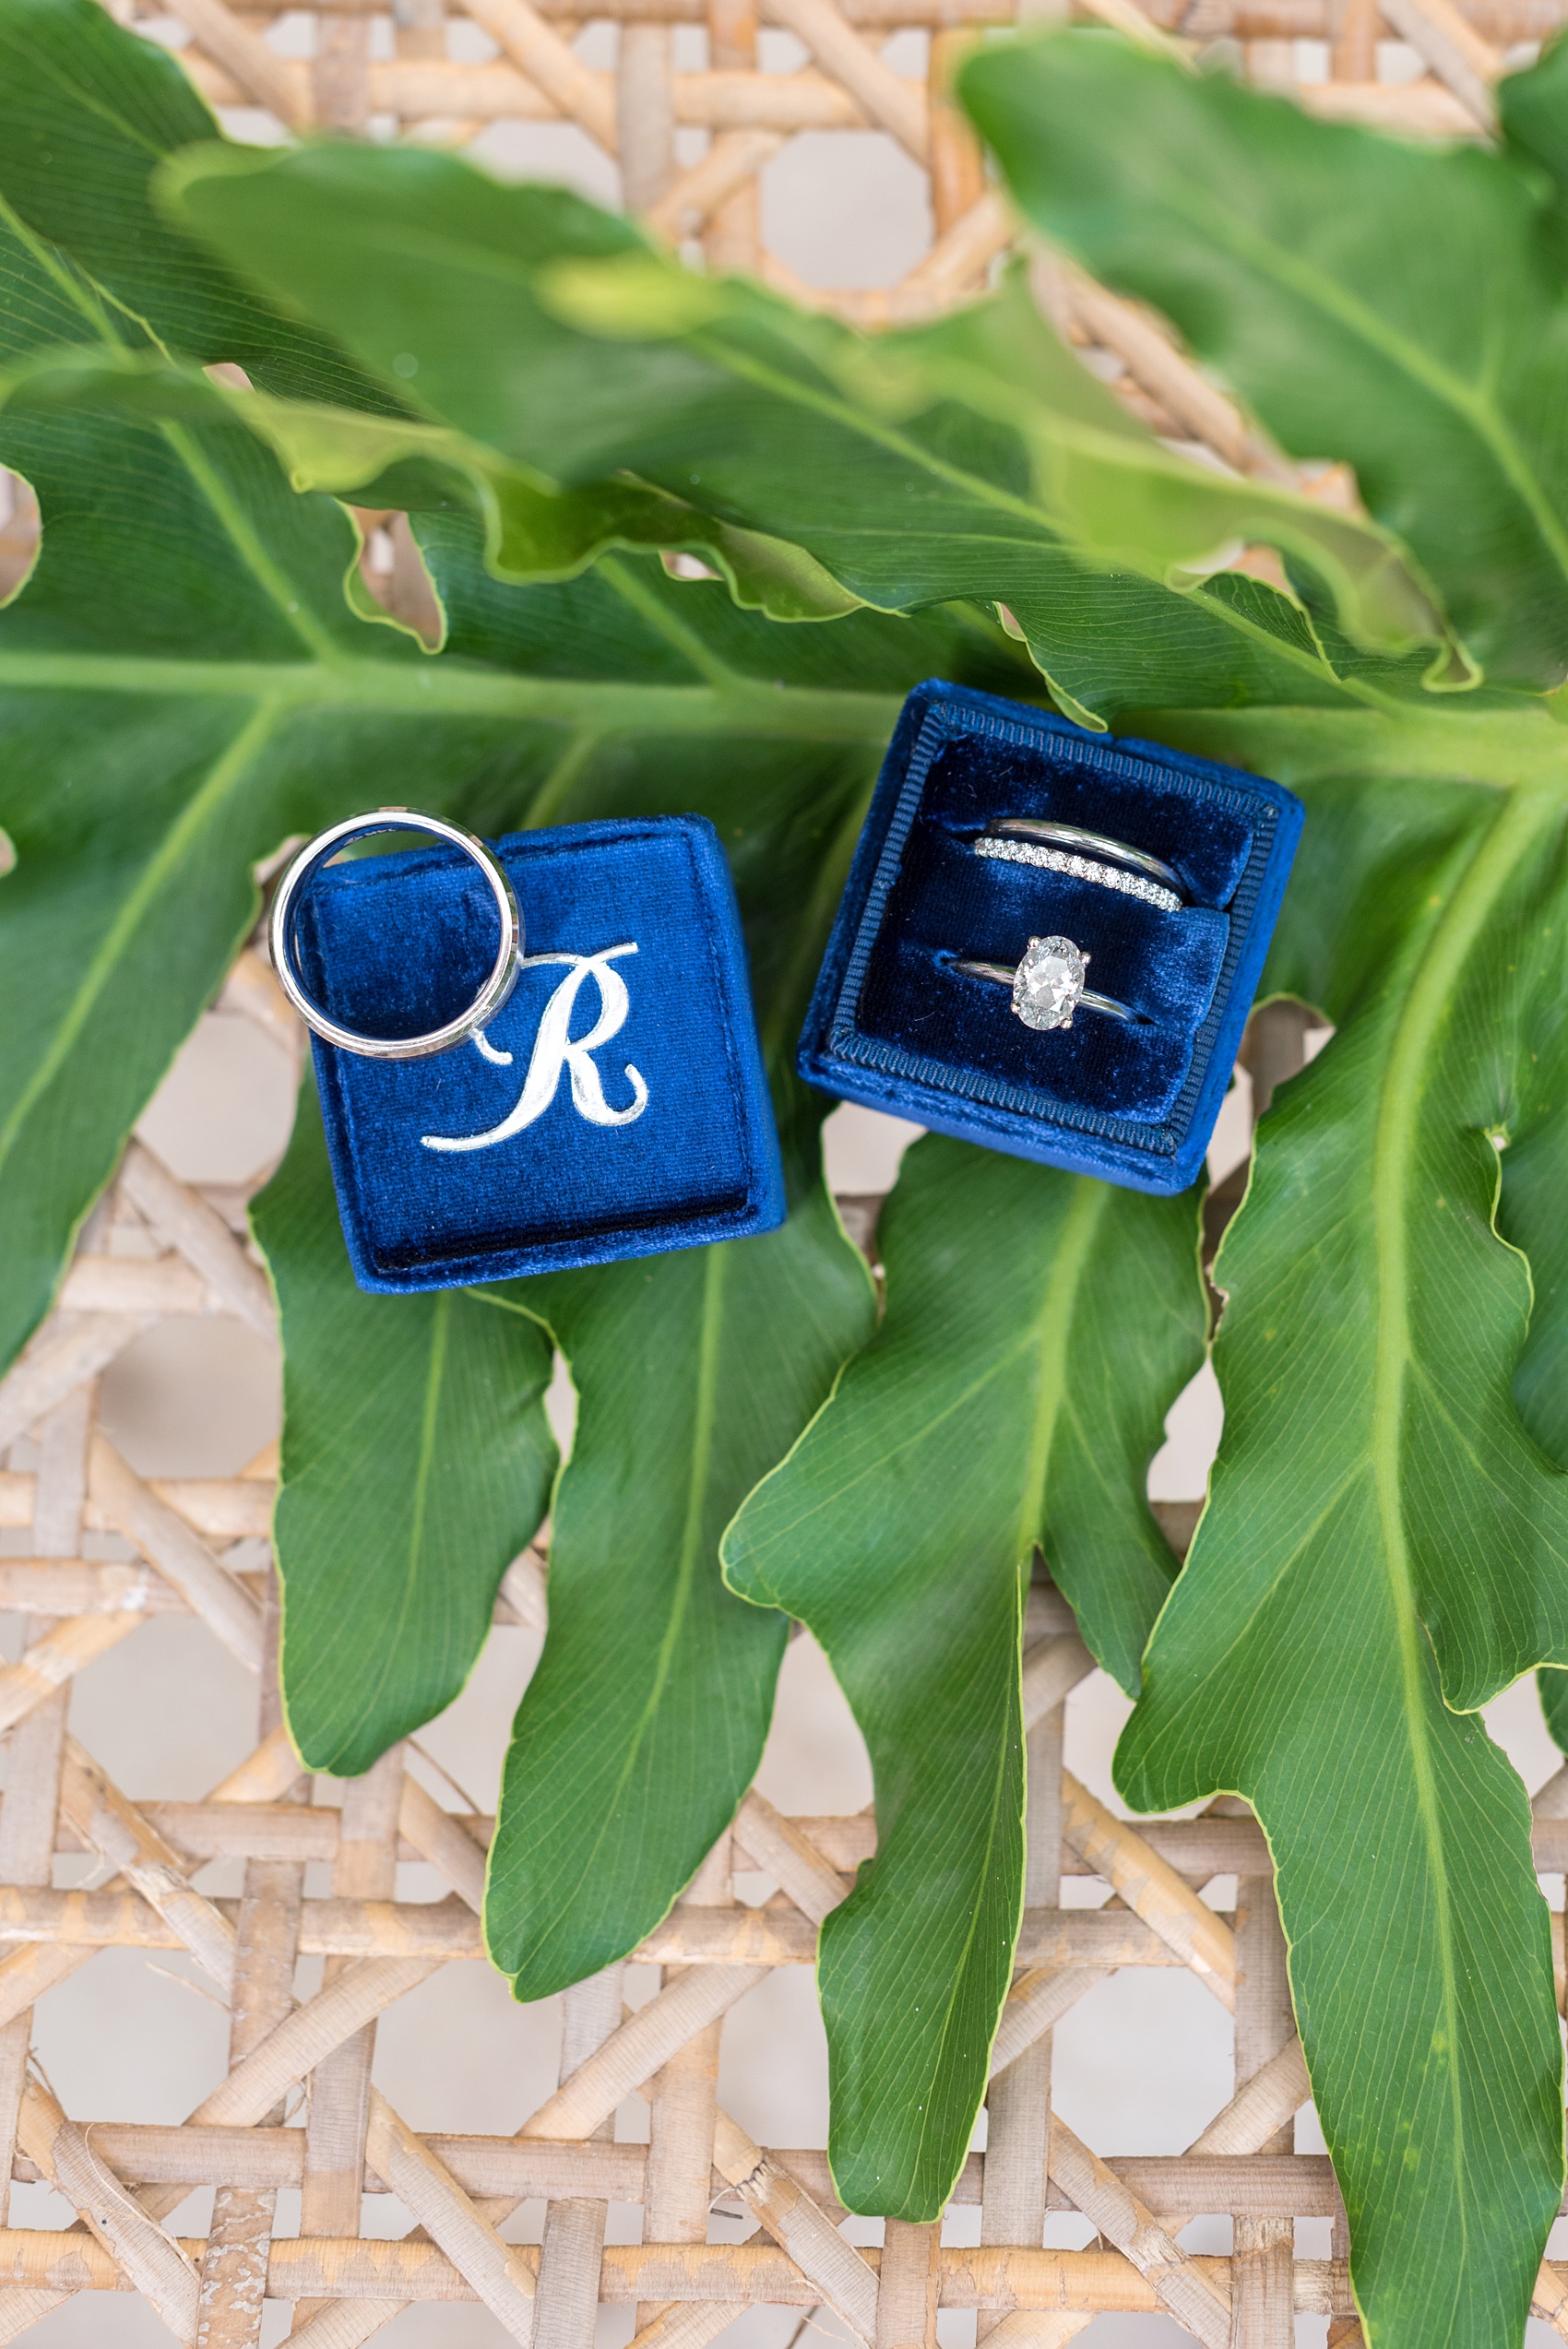 Mikkel Paige Photography, destination wedding photographer, pictures from Casa de Campo. This incredible venue in the Caribbean is in La Romana, Dominican Republic. It has such character and awesome, beautiful locations for photography at every turn. This photo of the rings in a blue velvet Mrs. Box will inspire you! Click through for more photos from a gorgeous wedding! #DestinationWedding #DestinationWeddingPhotographer #MikkelPaige #DominicanRepublicWedding #MrsBox